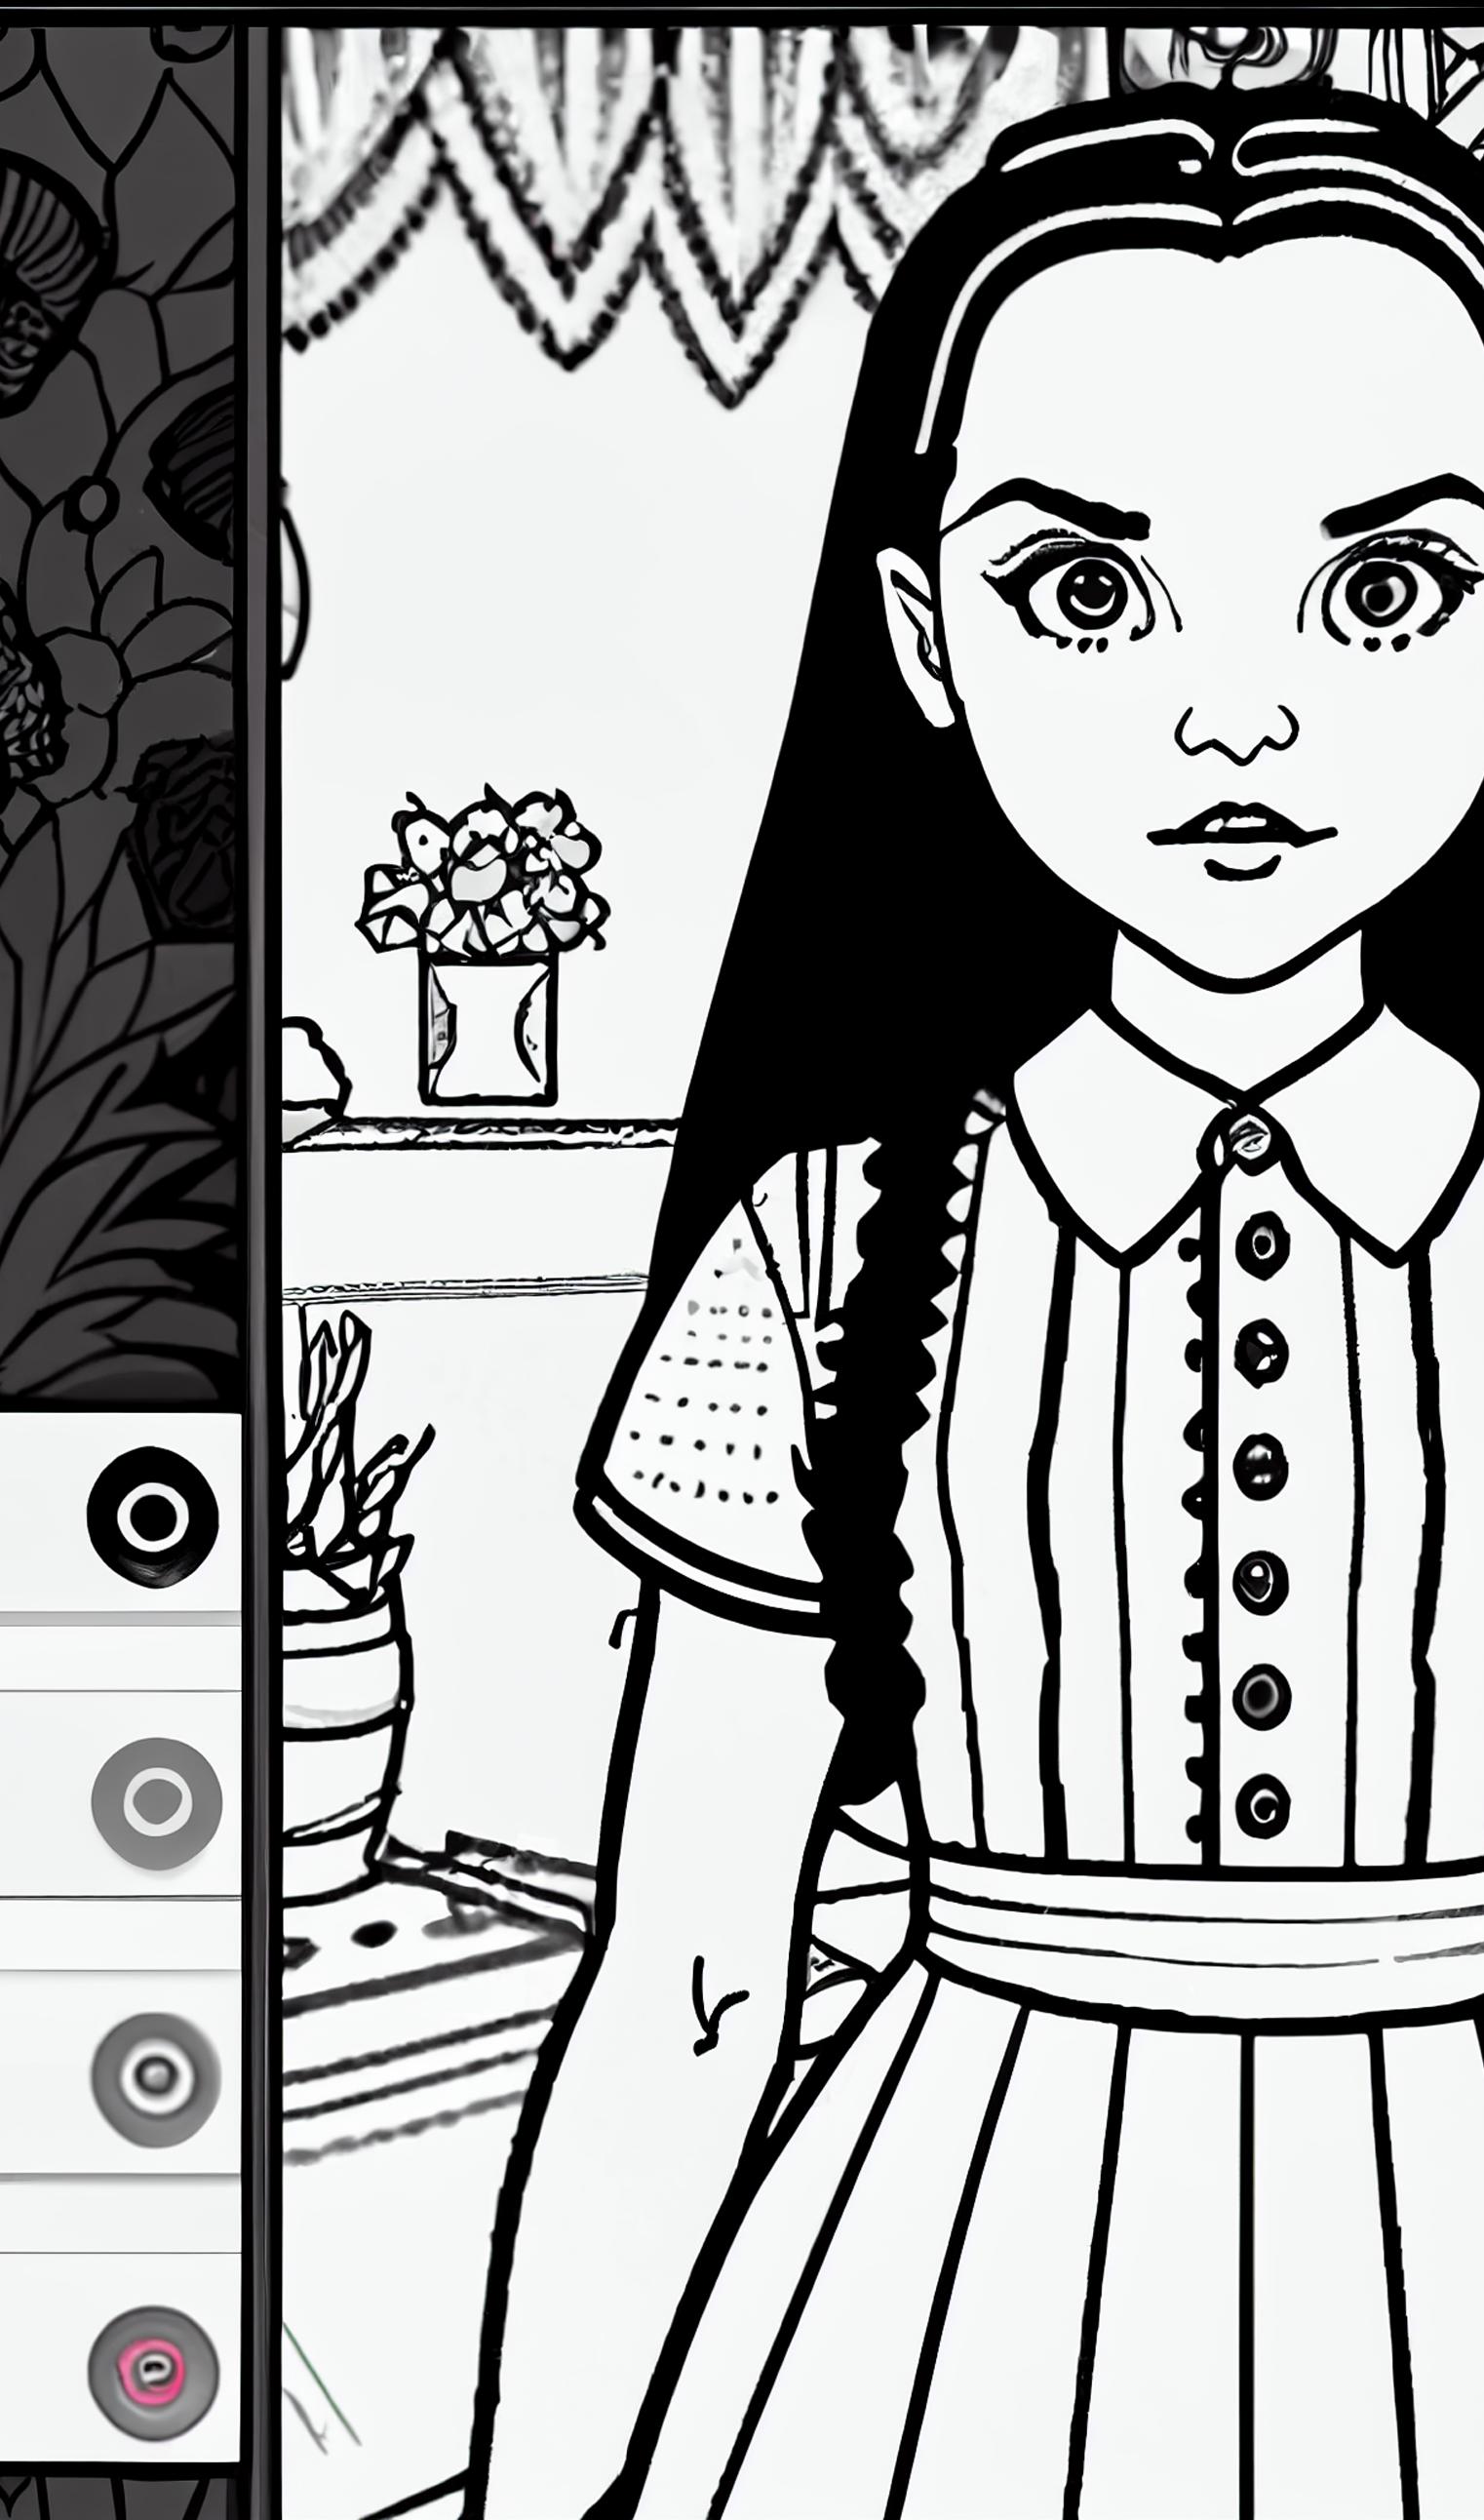 Wednesday Addams Coloring Book APK pour Android Télécharger